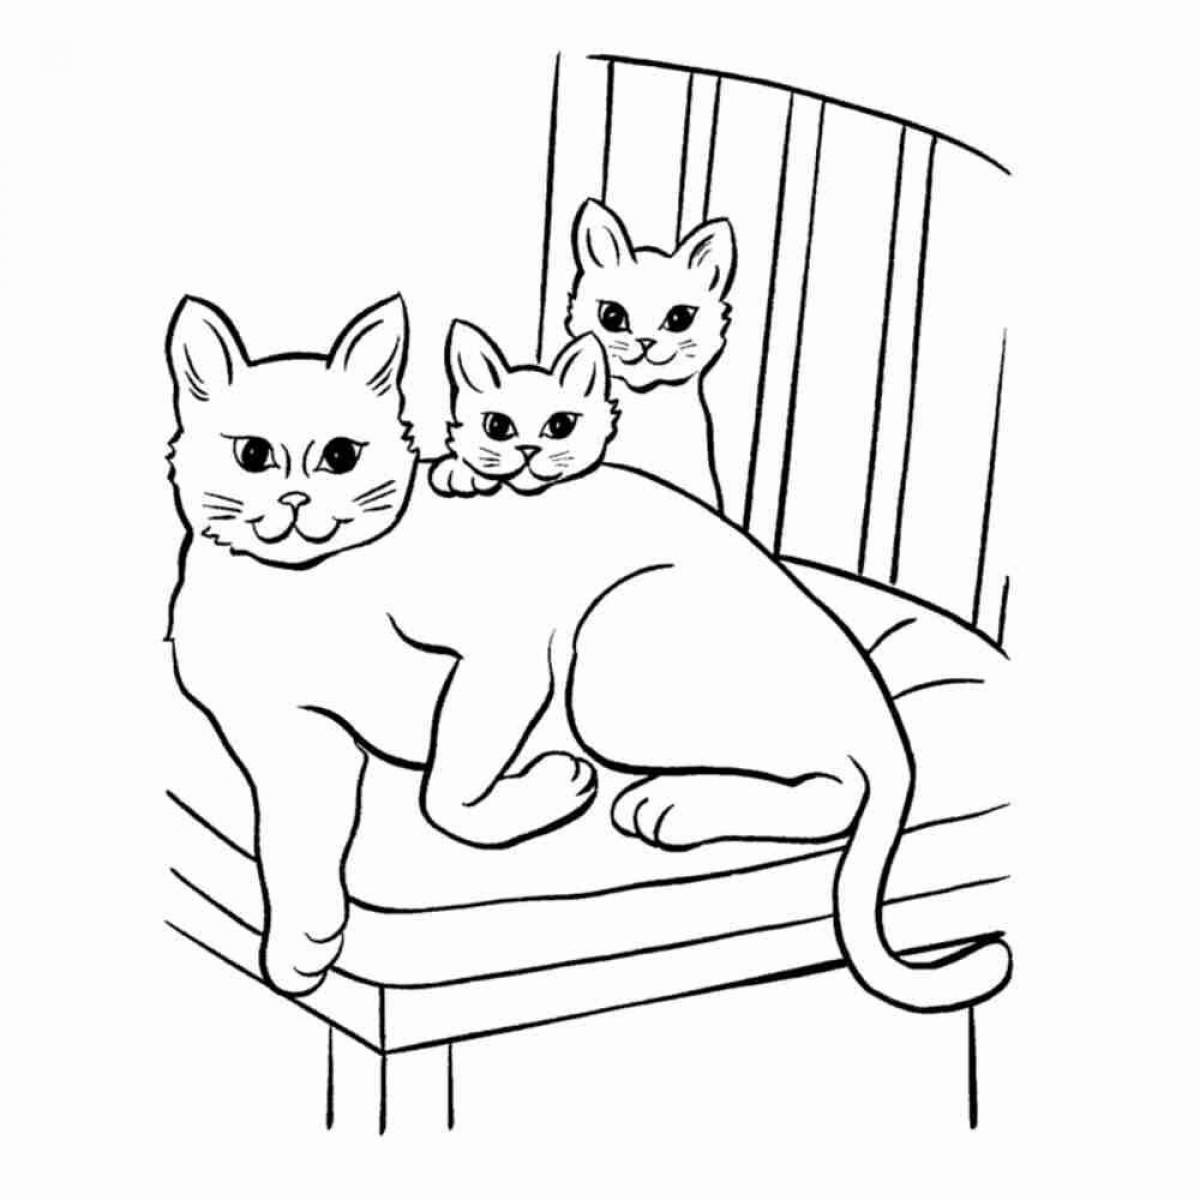 Amazing coloring book for cats